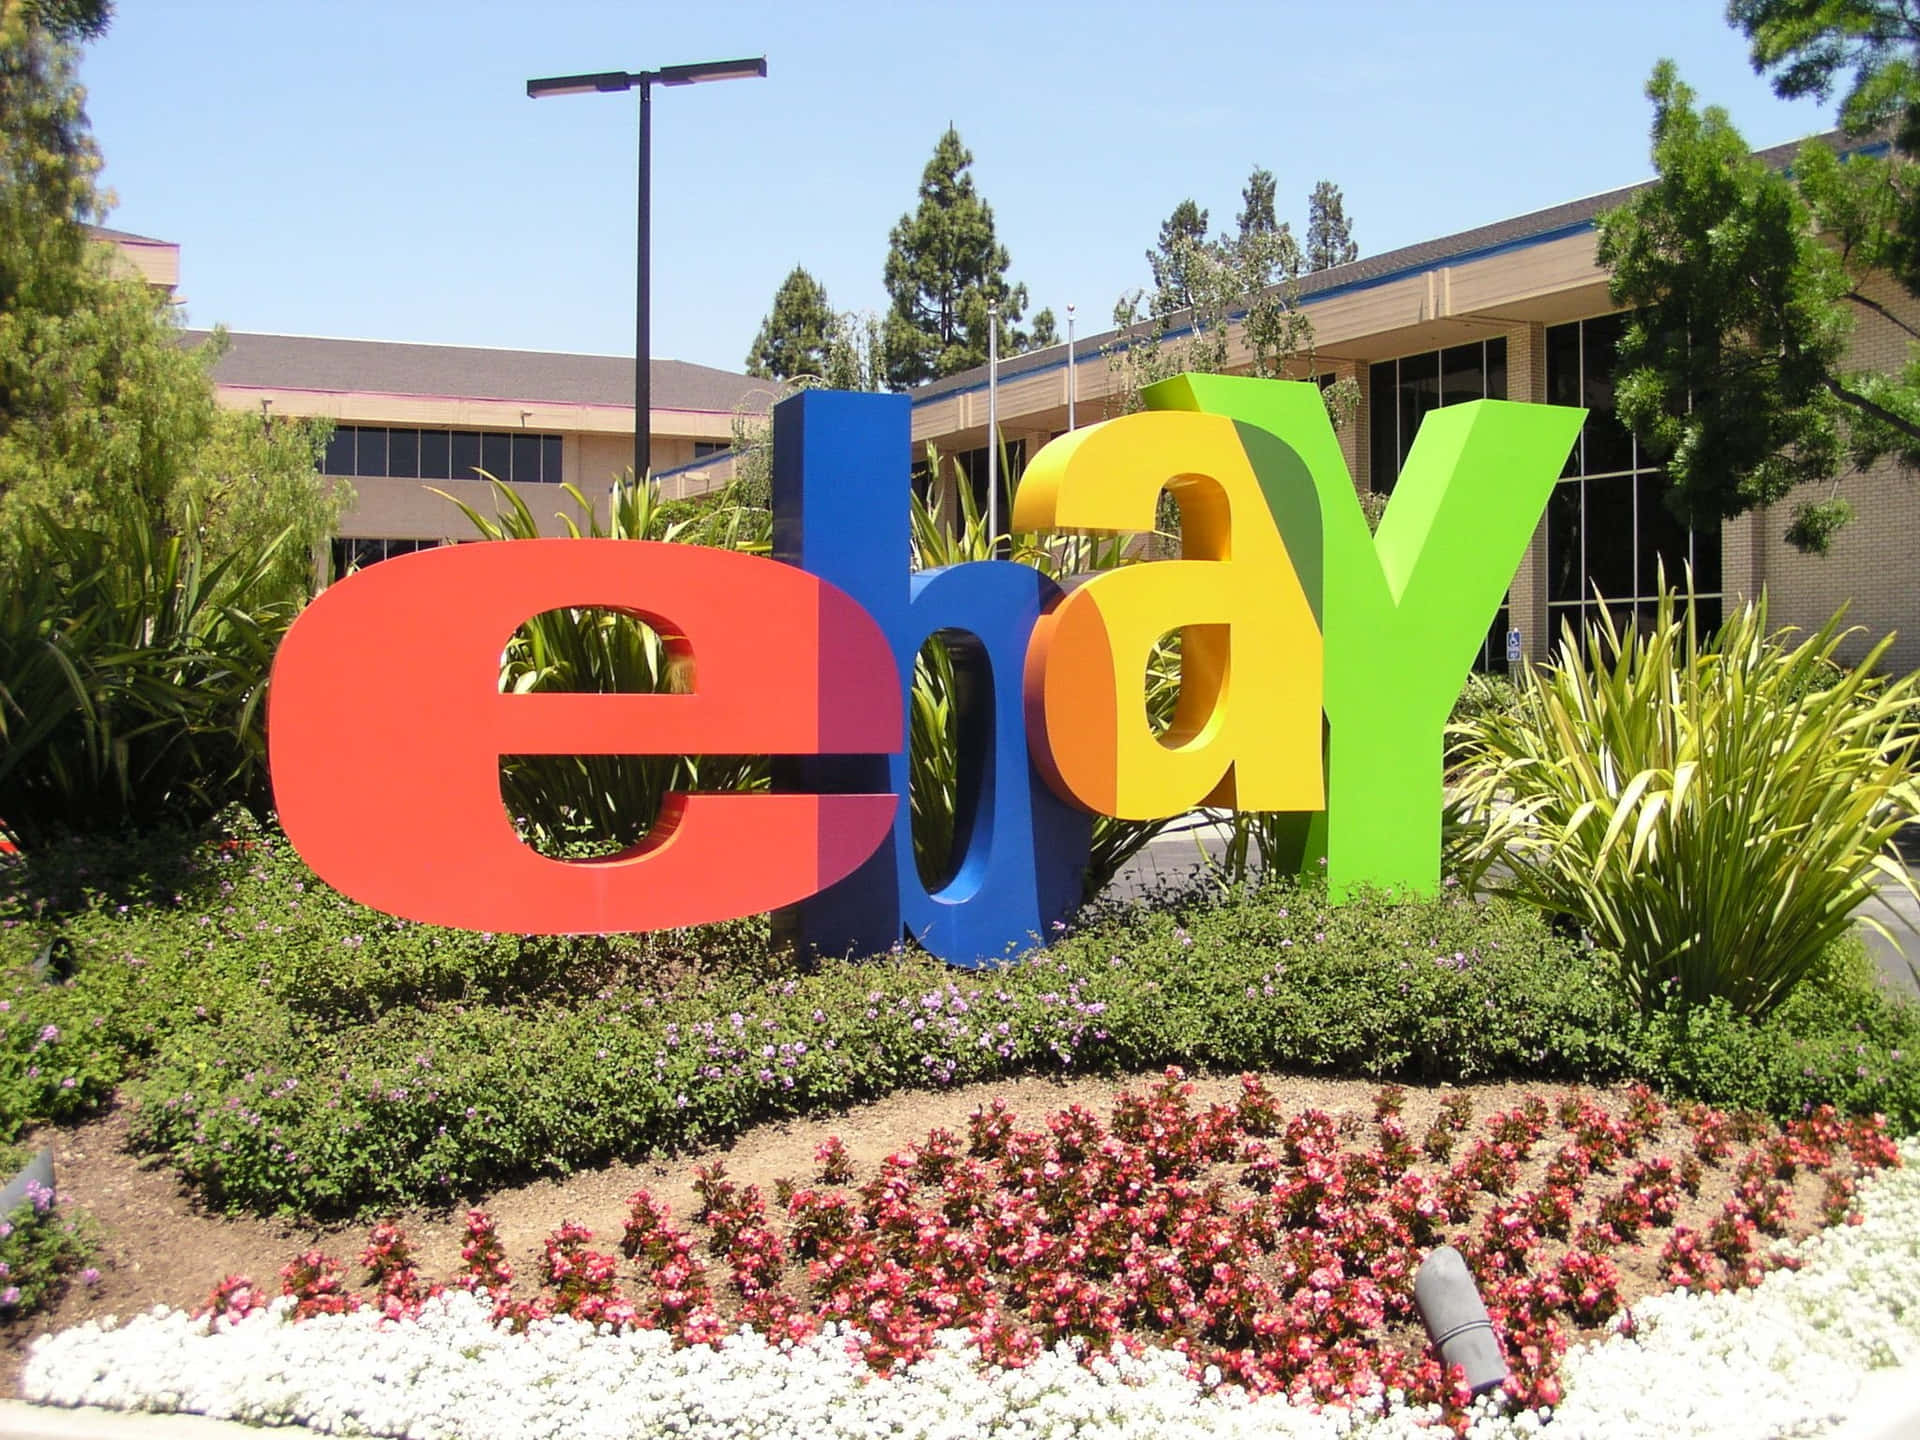 Buy and sell on Ebay, the world's largest online marketplace!